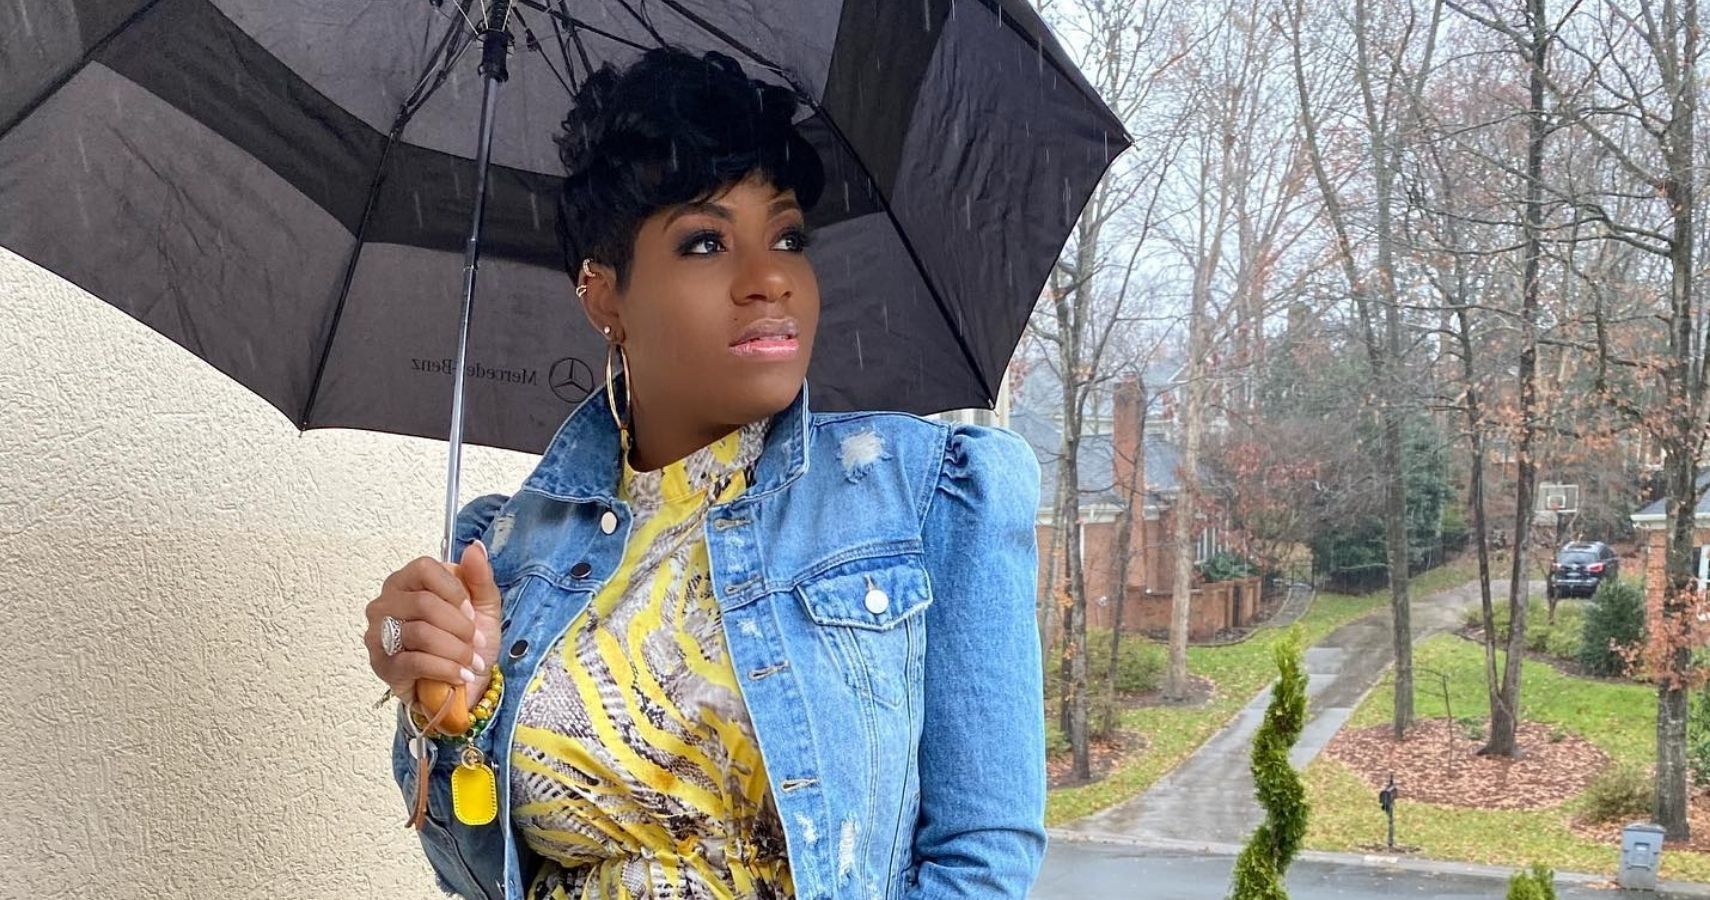 Fantasia Barrino opens up about fertility issues